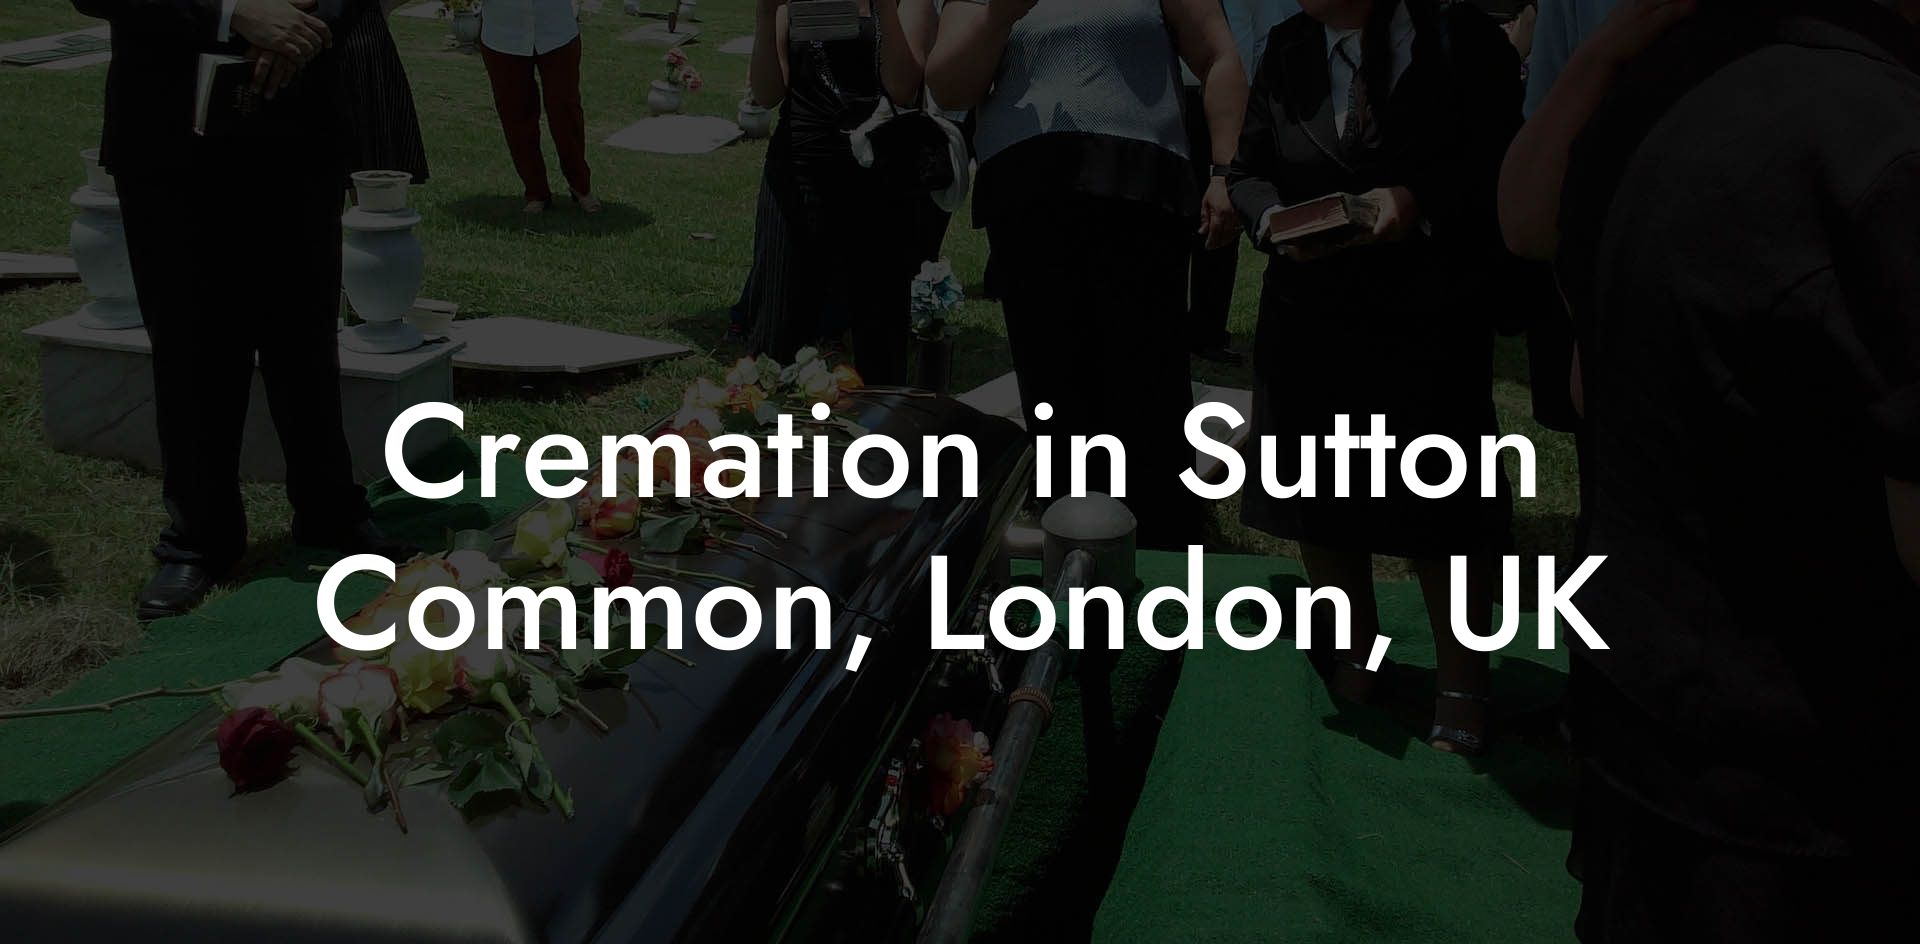 Cremation in Sutton Common, London, UK